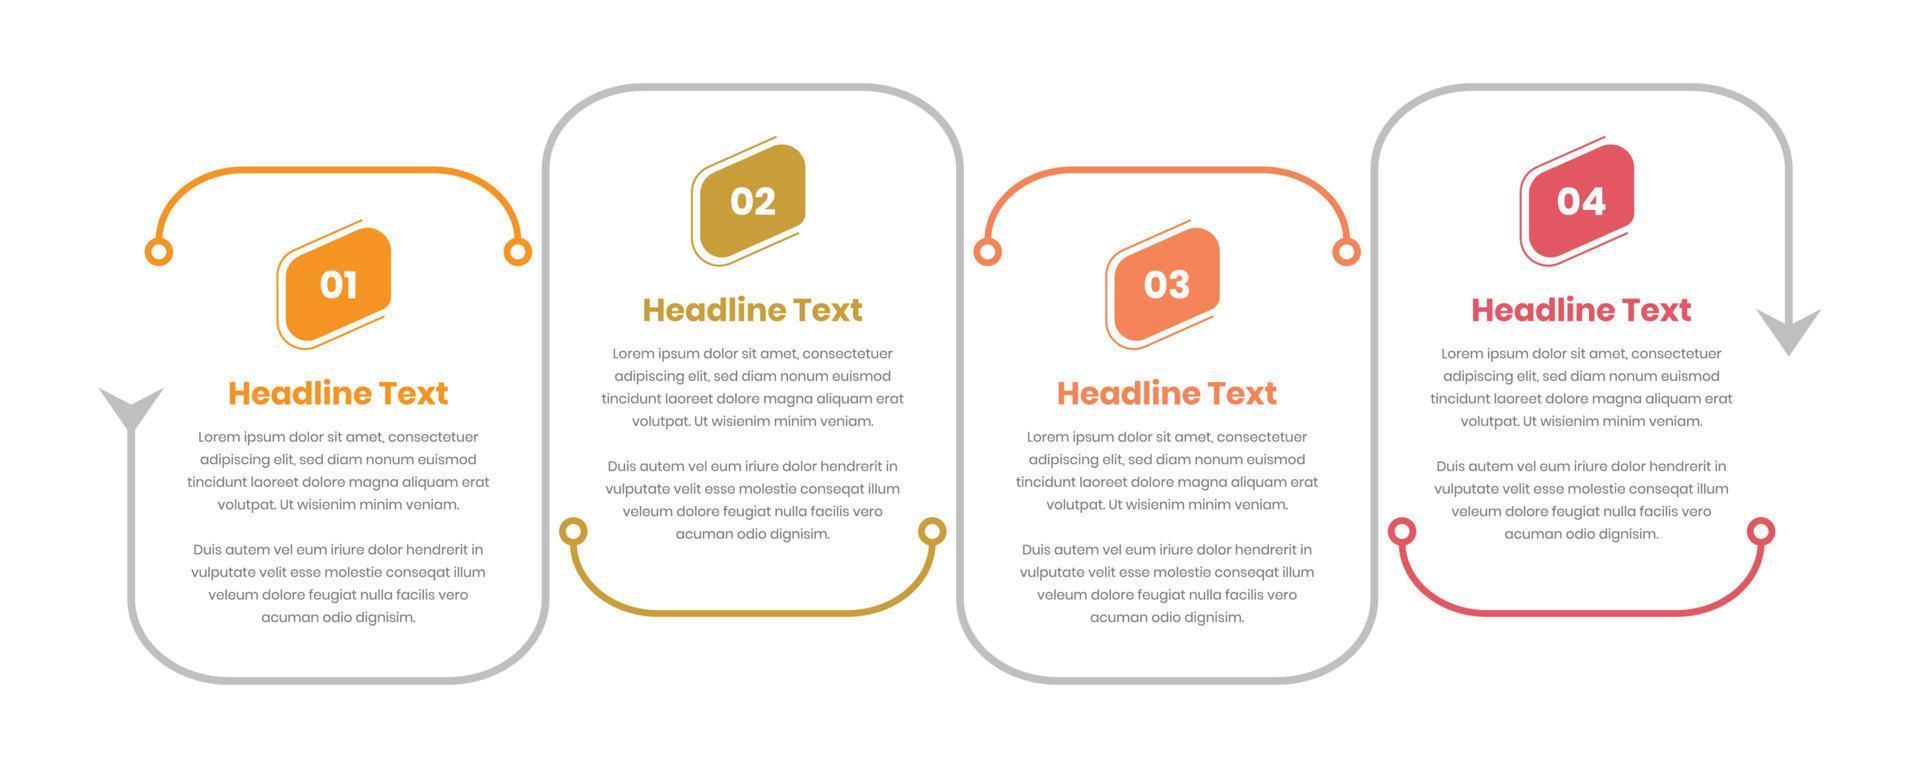 Business steps text presentation timeline infographic template with arrow shape vector